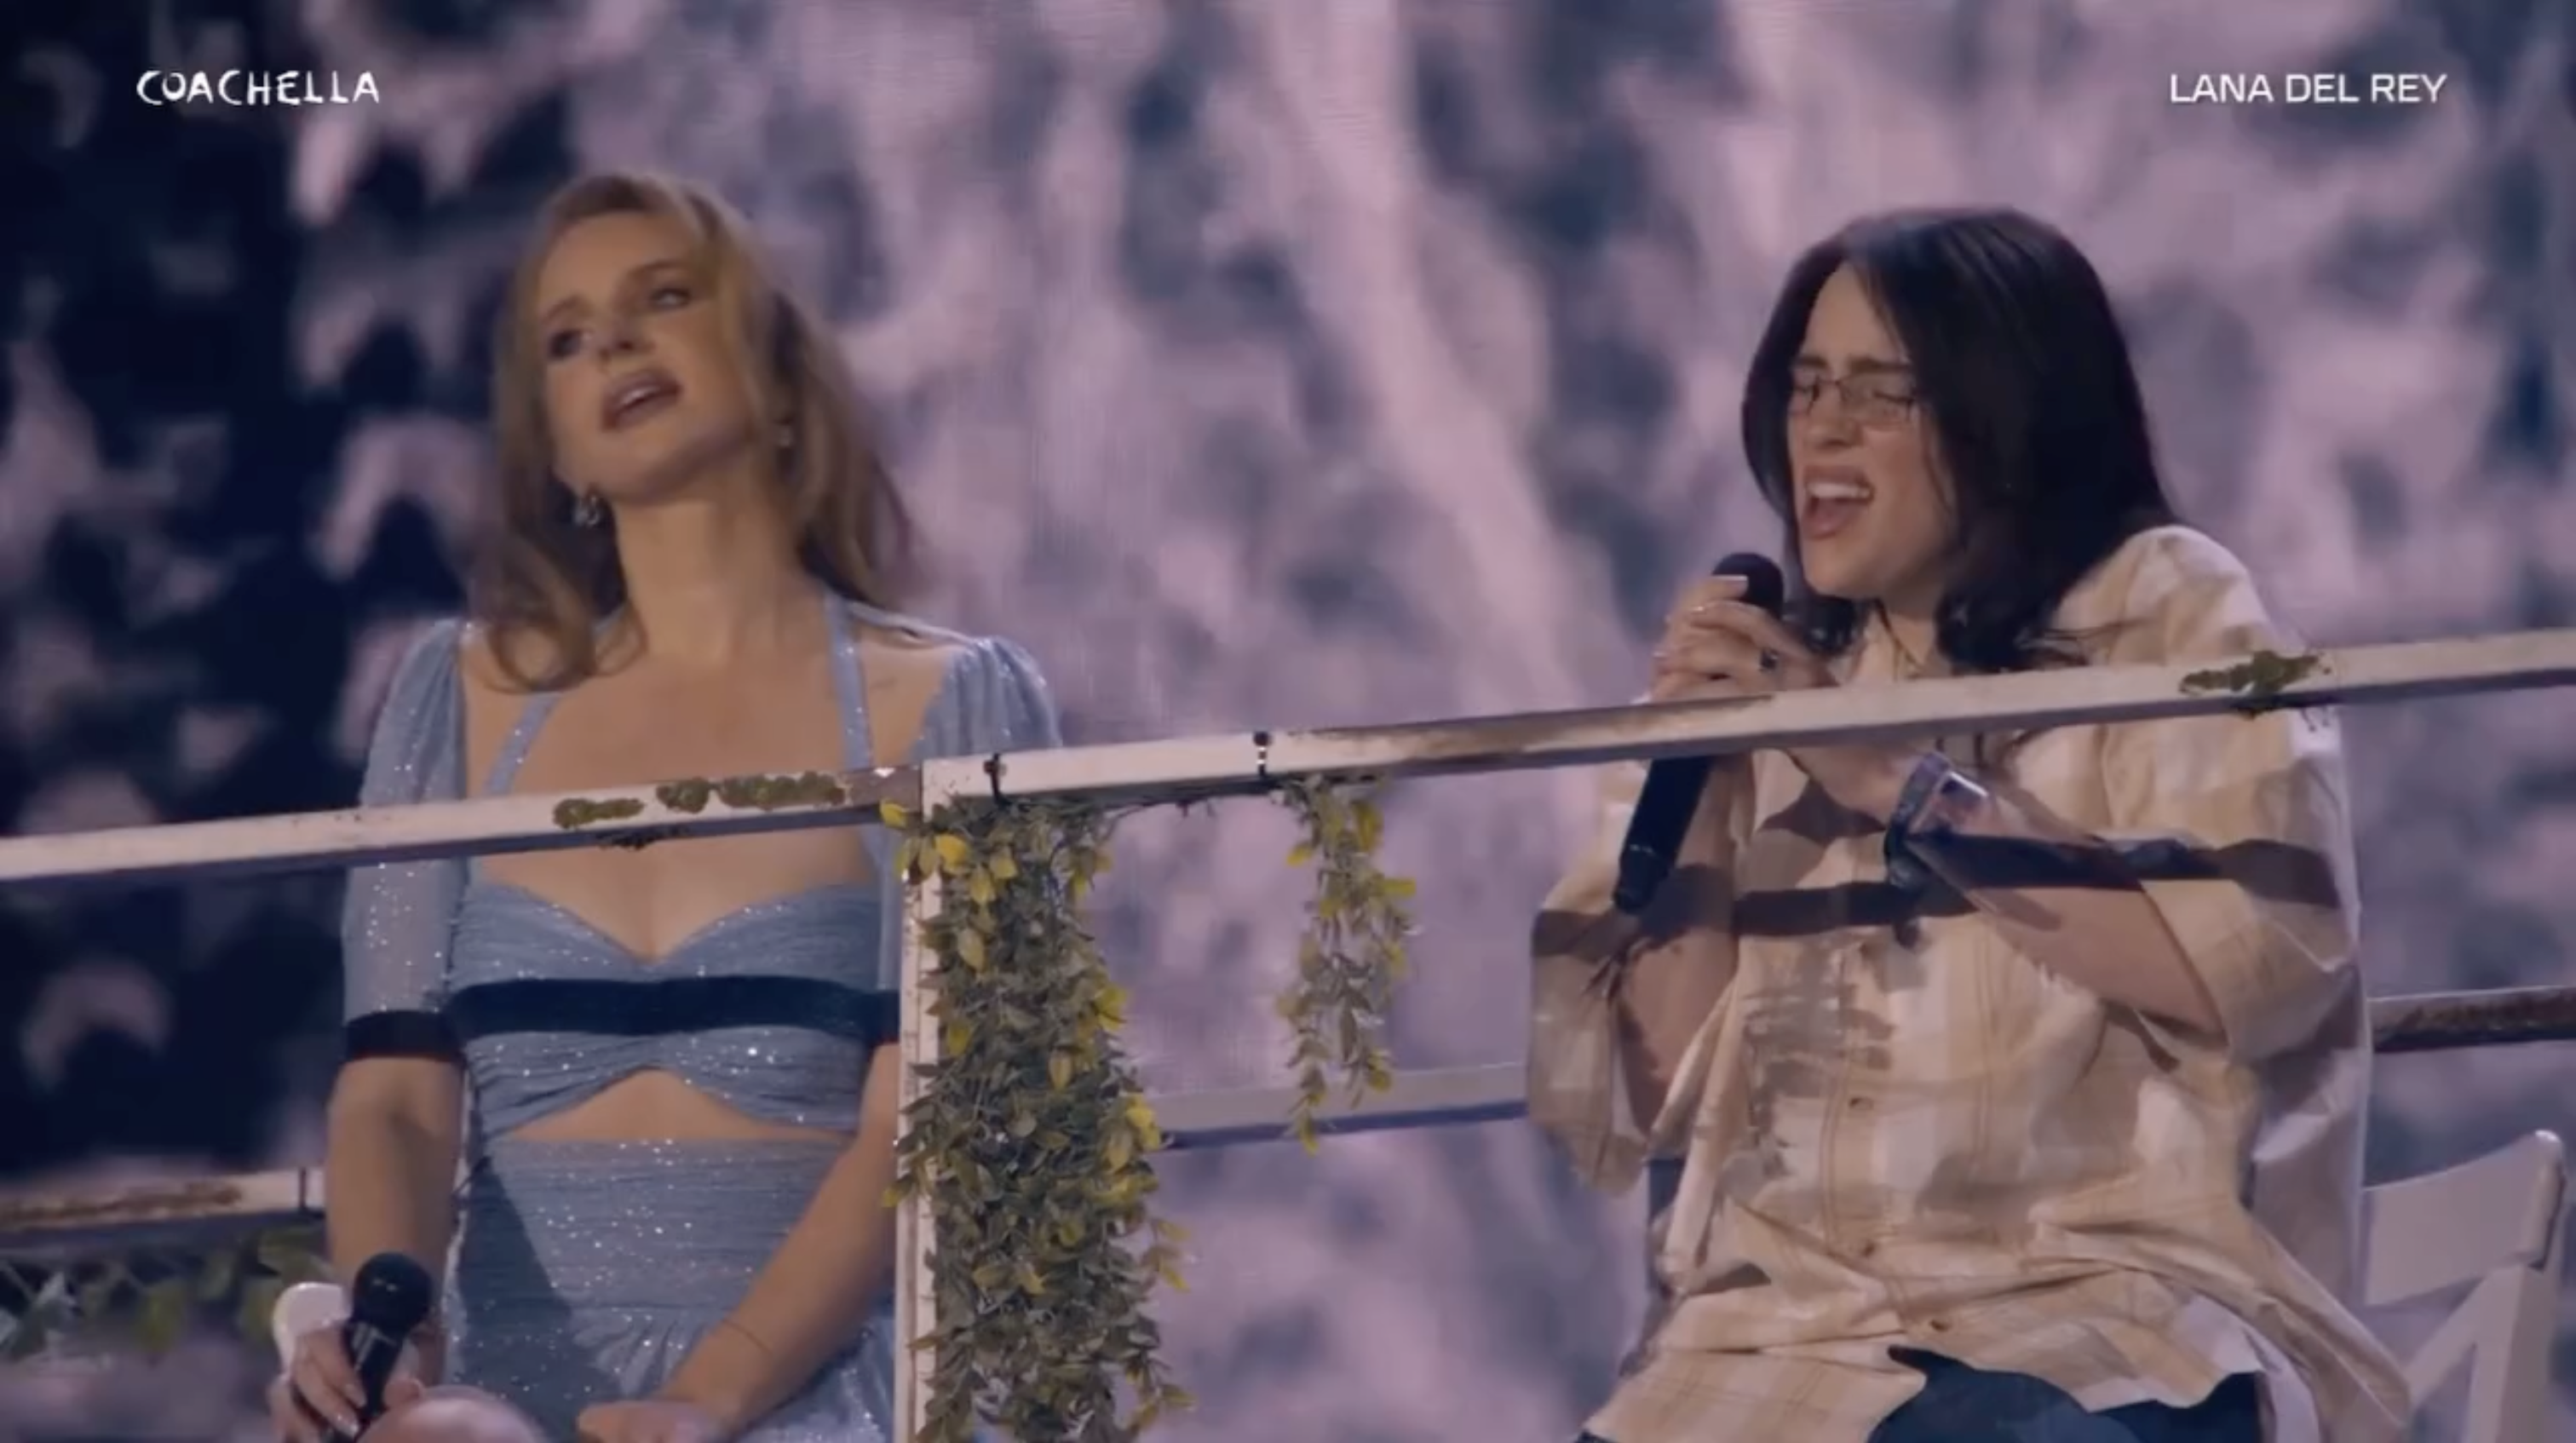 Watch Billie Eilish Join Lana Del Rey For “Ocean Eyes” And “Video Games” At Coachella